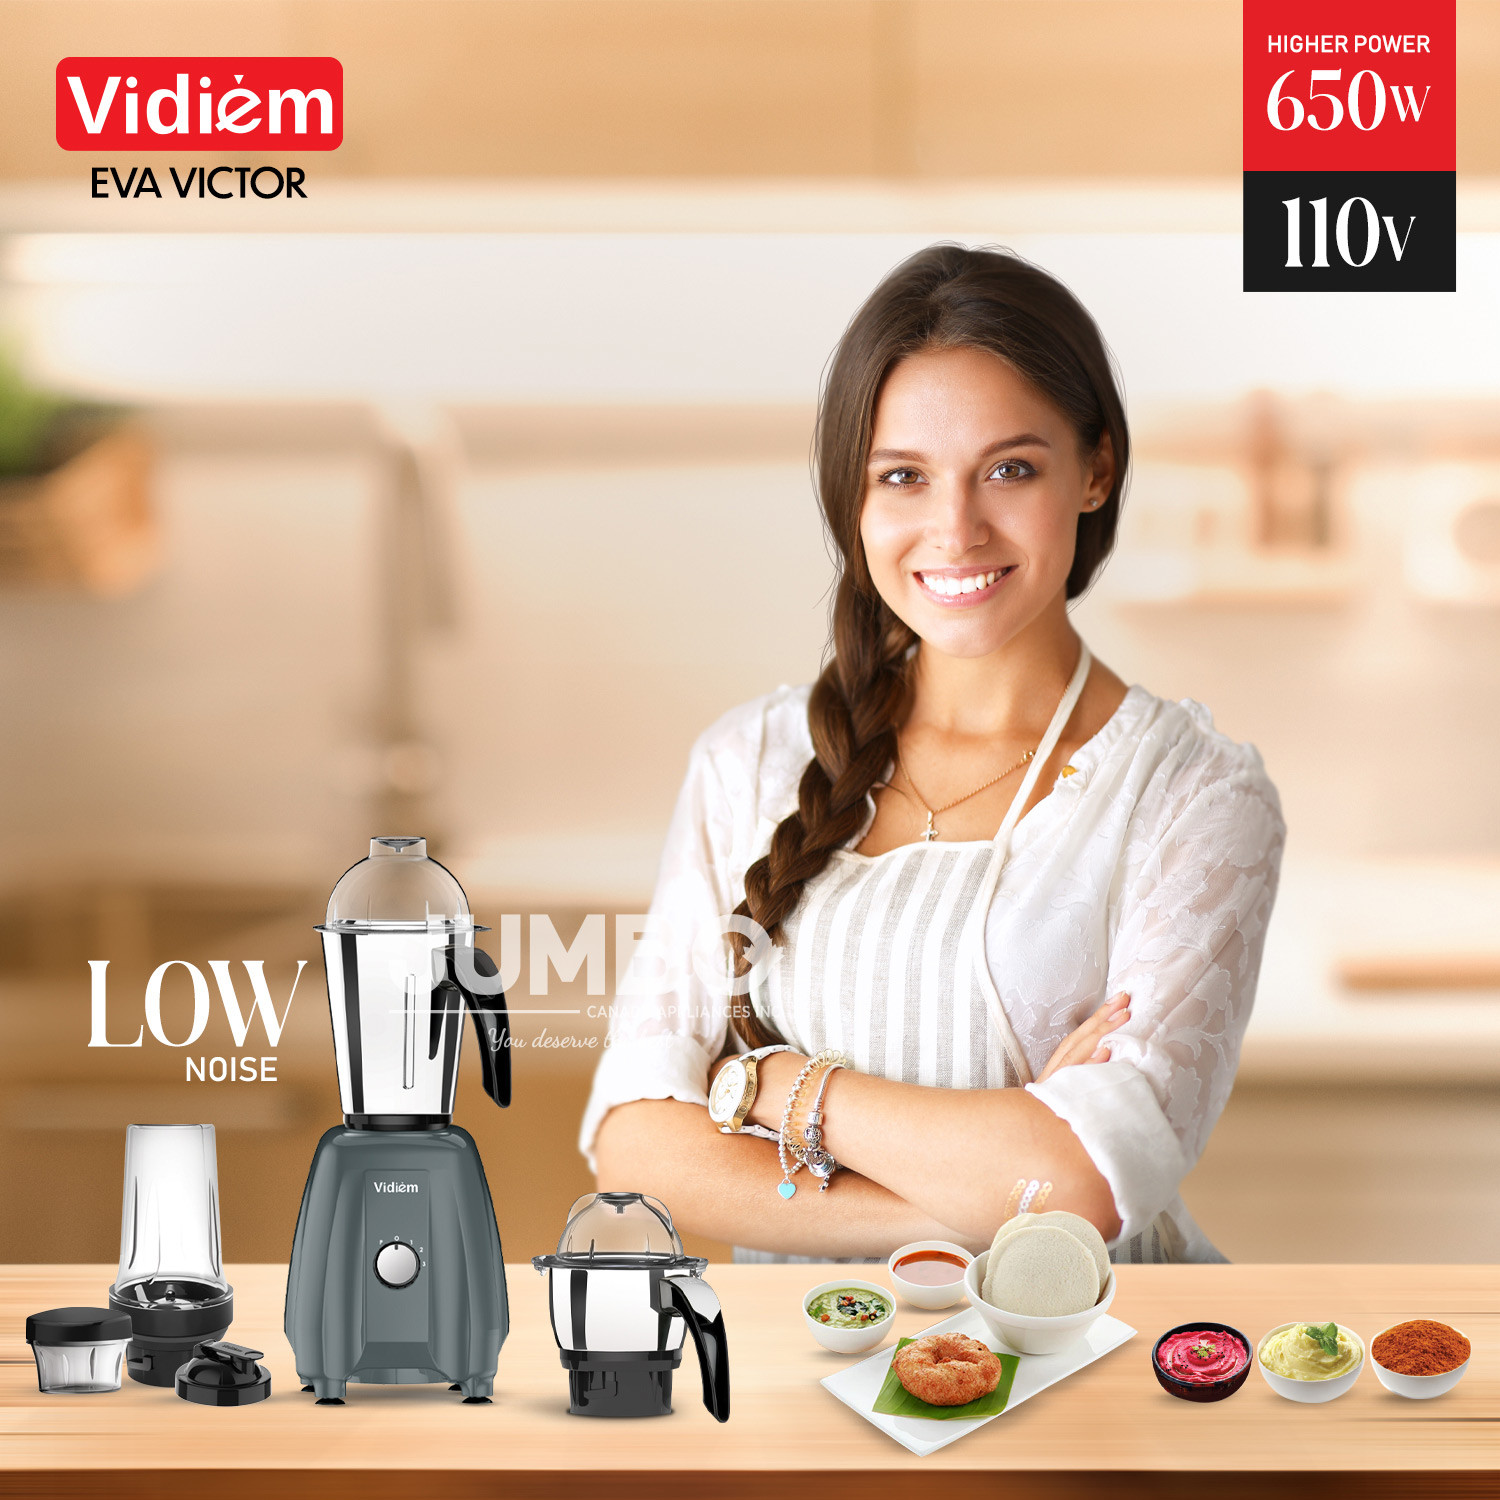 vidiem-eva-victor-pro-650w-110v-indian-mixer-grinder-ss-jars-250ml-spice-personal-coffee-herbs-grinder-with-500ml-personal-juices-shakes-smoothie-blender-made-for-canada-usa7